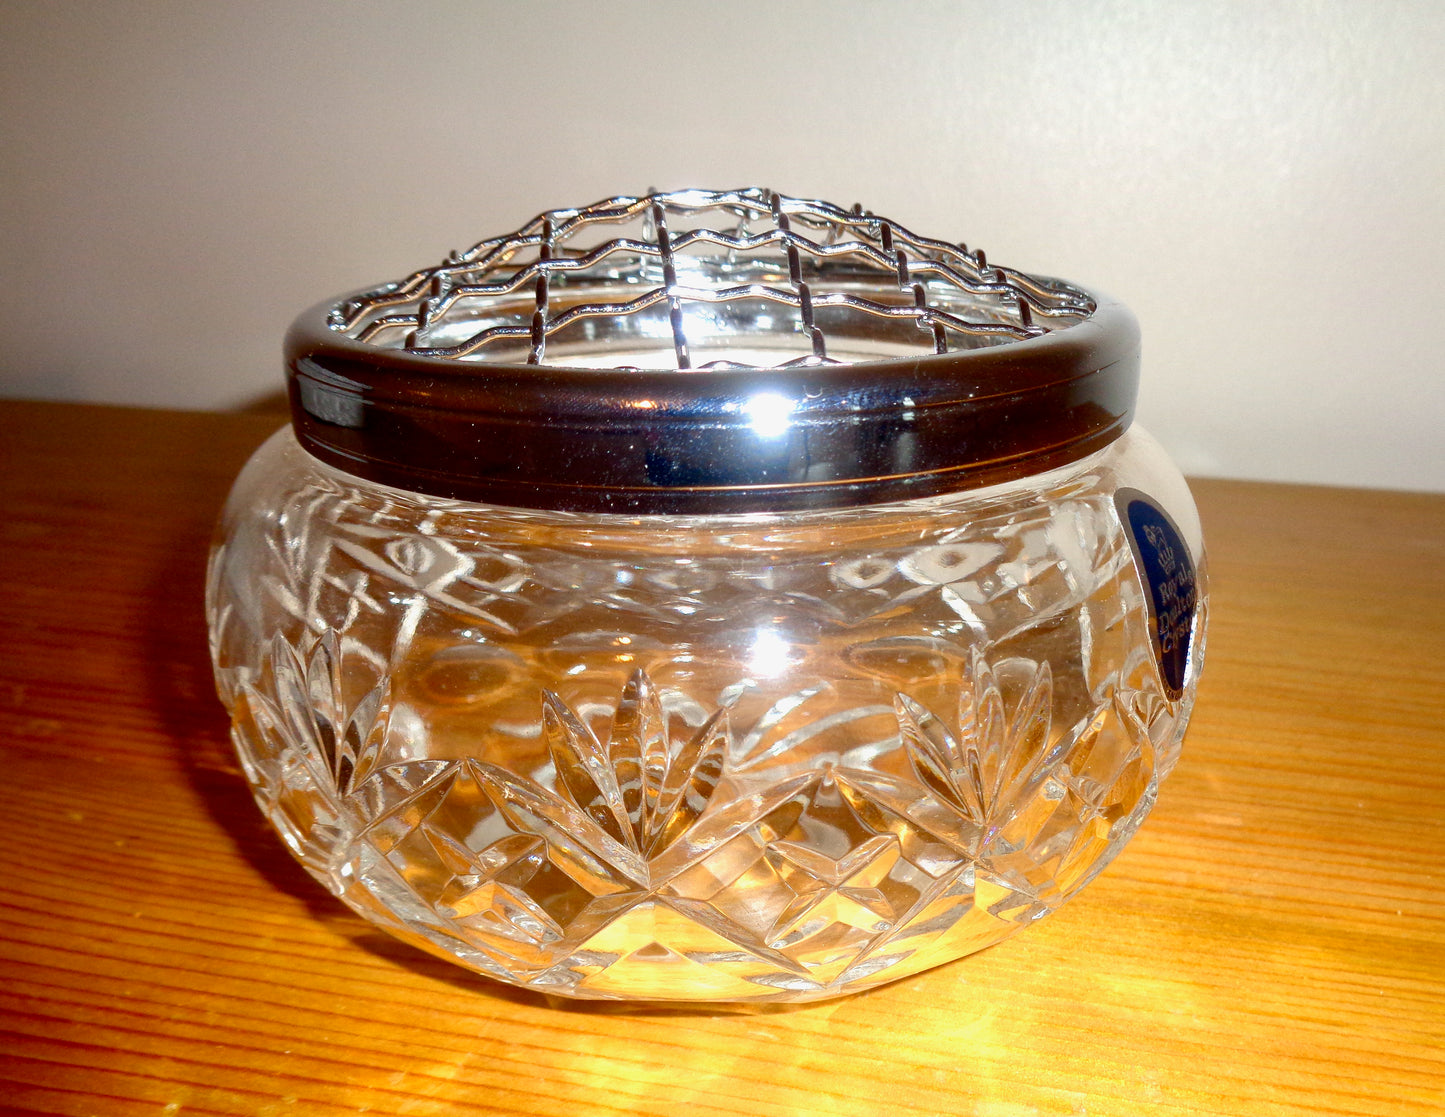 Royal Doulton Lead Crystal Rose Bowl With Silver Plated Flower Grid In Its Original Box